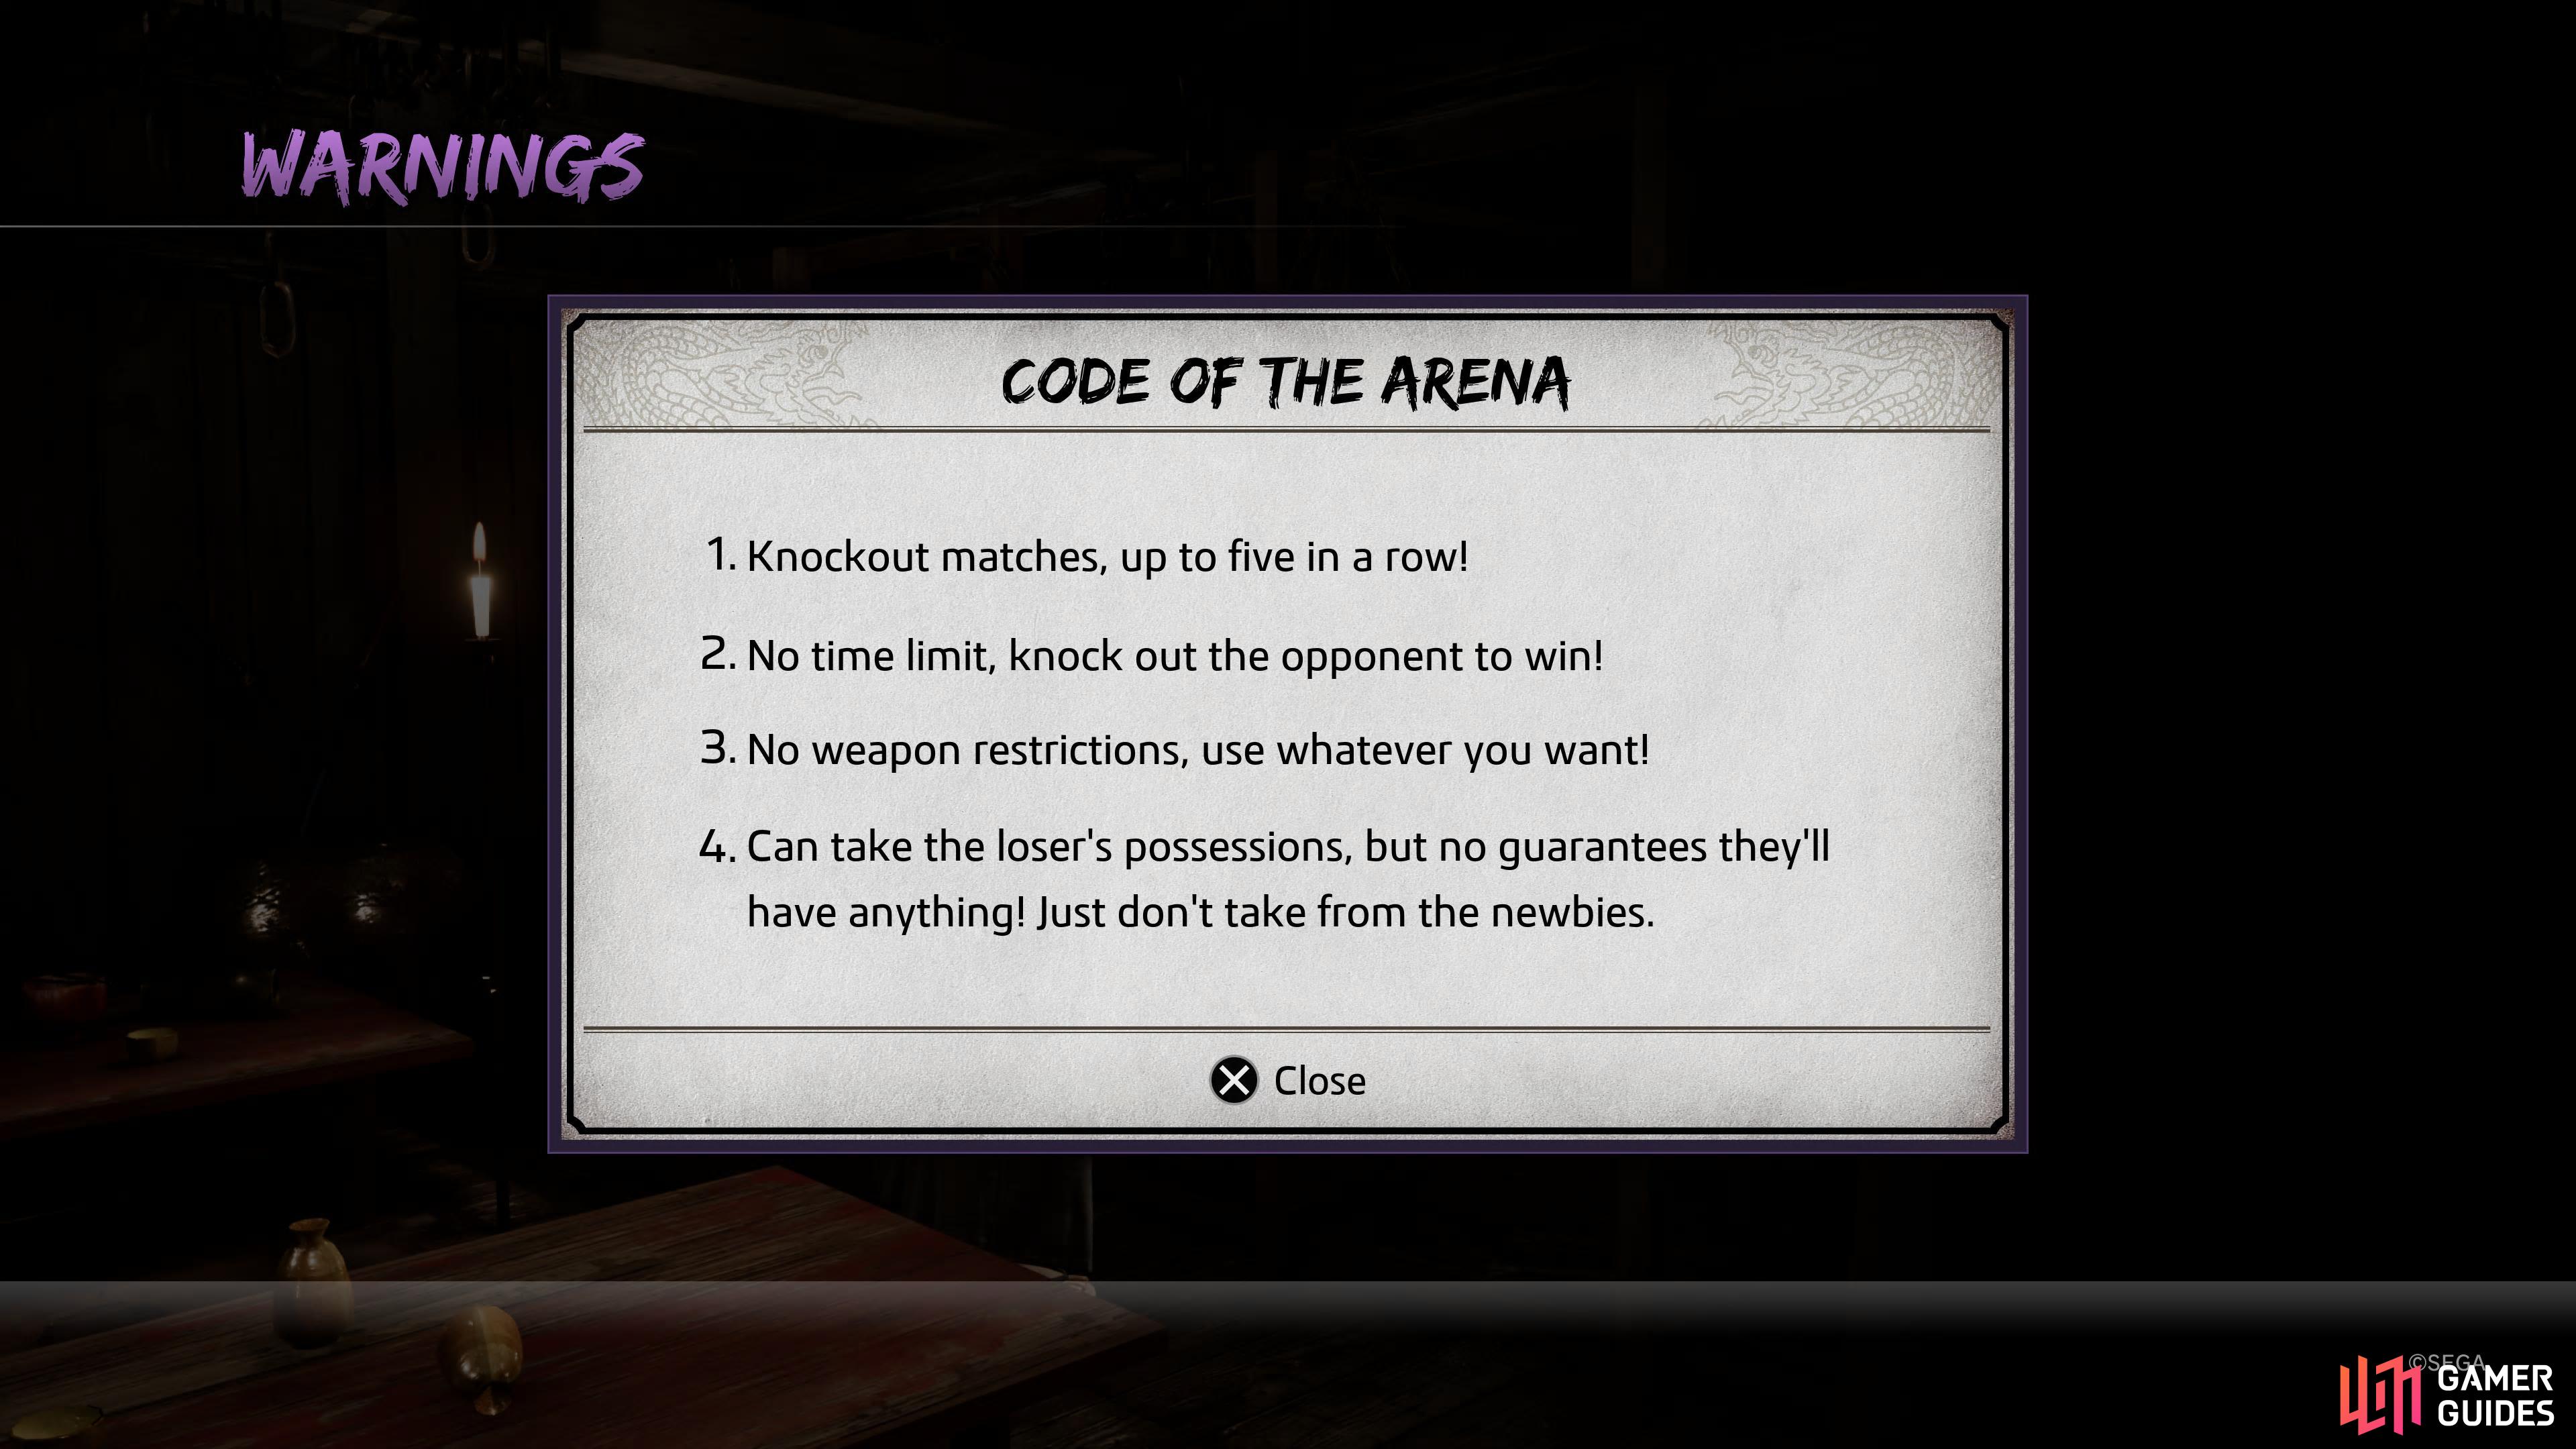 The Rules option will show you the Rules of the Arena.